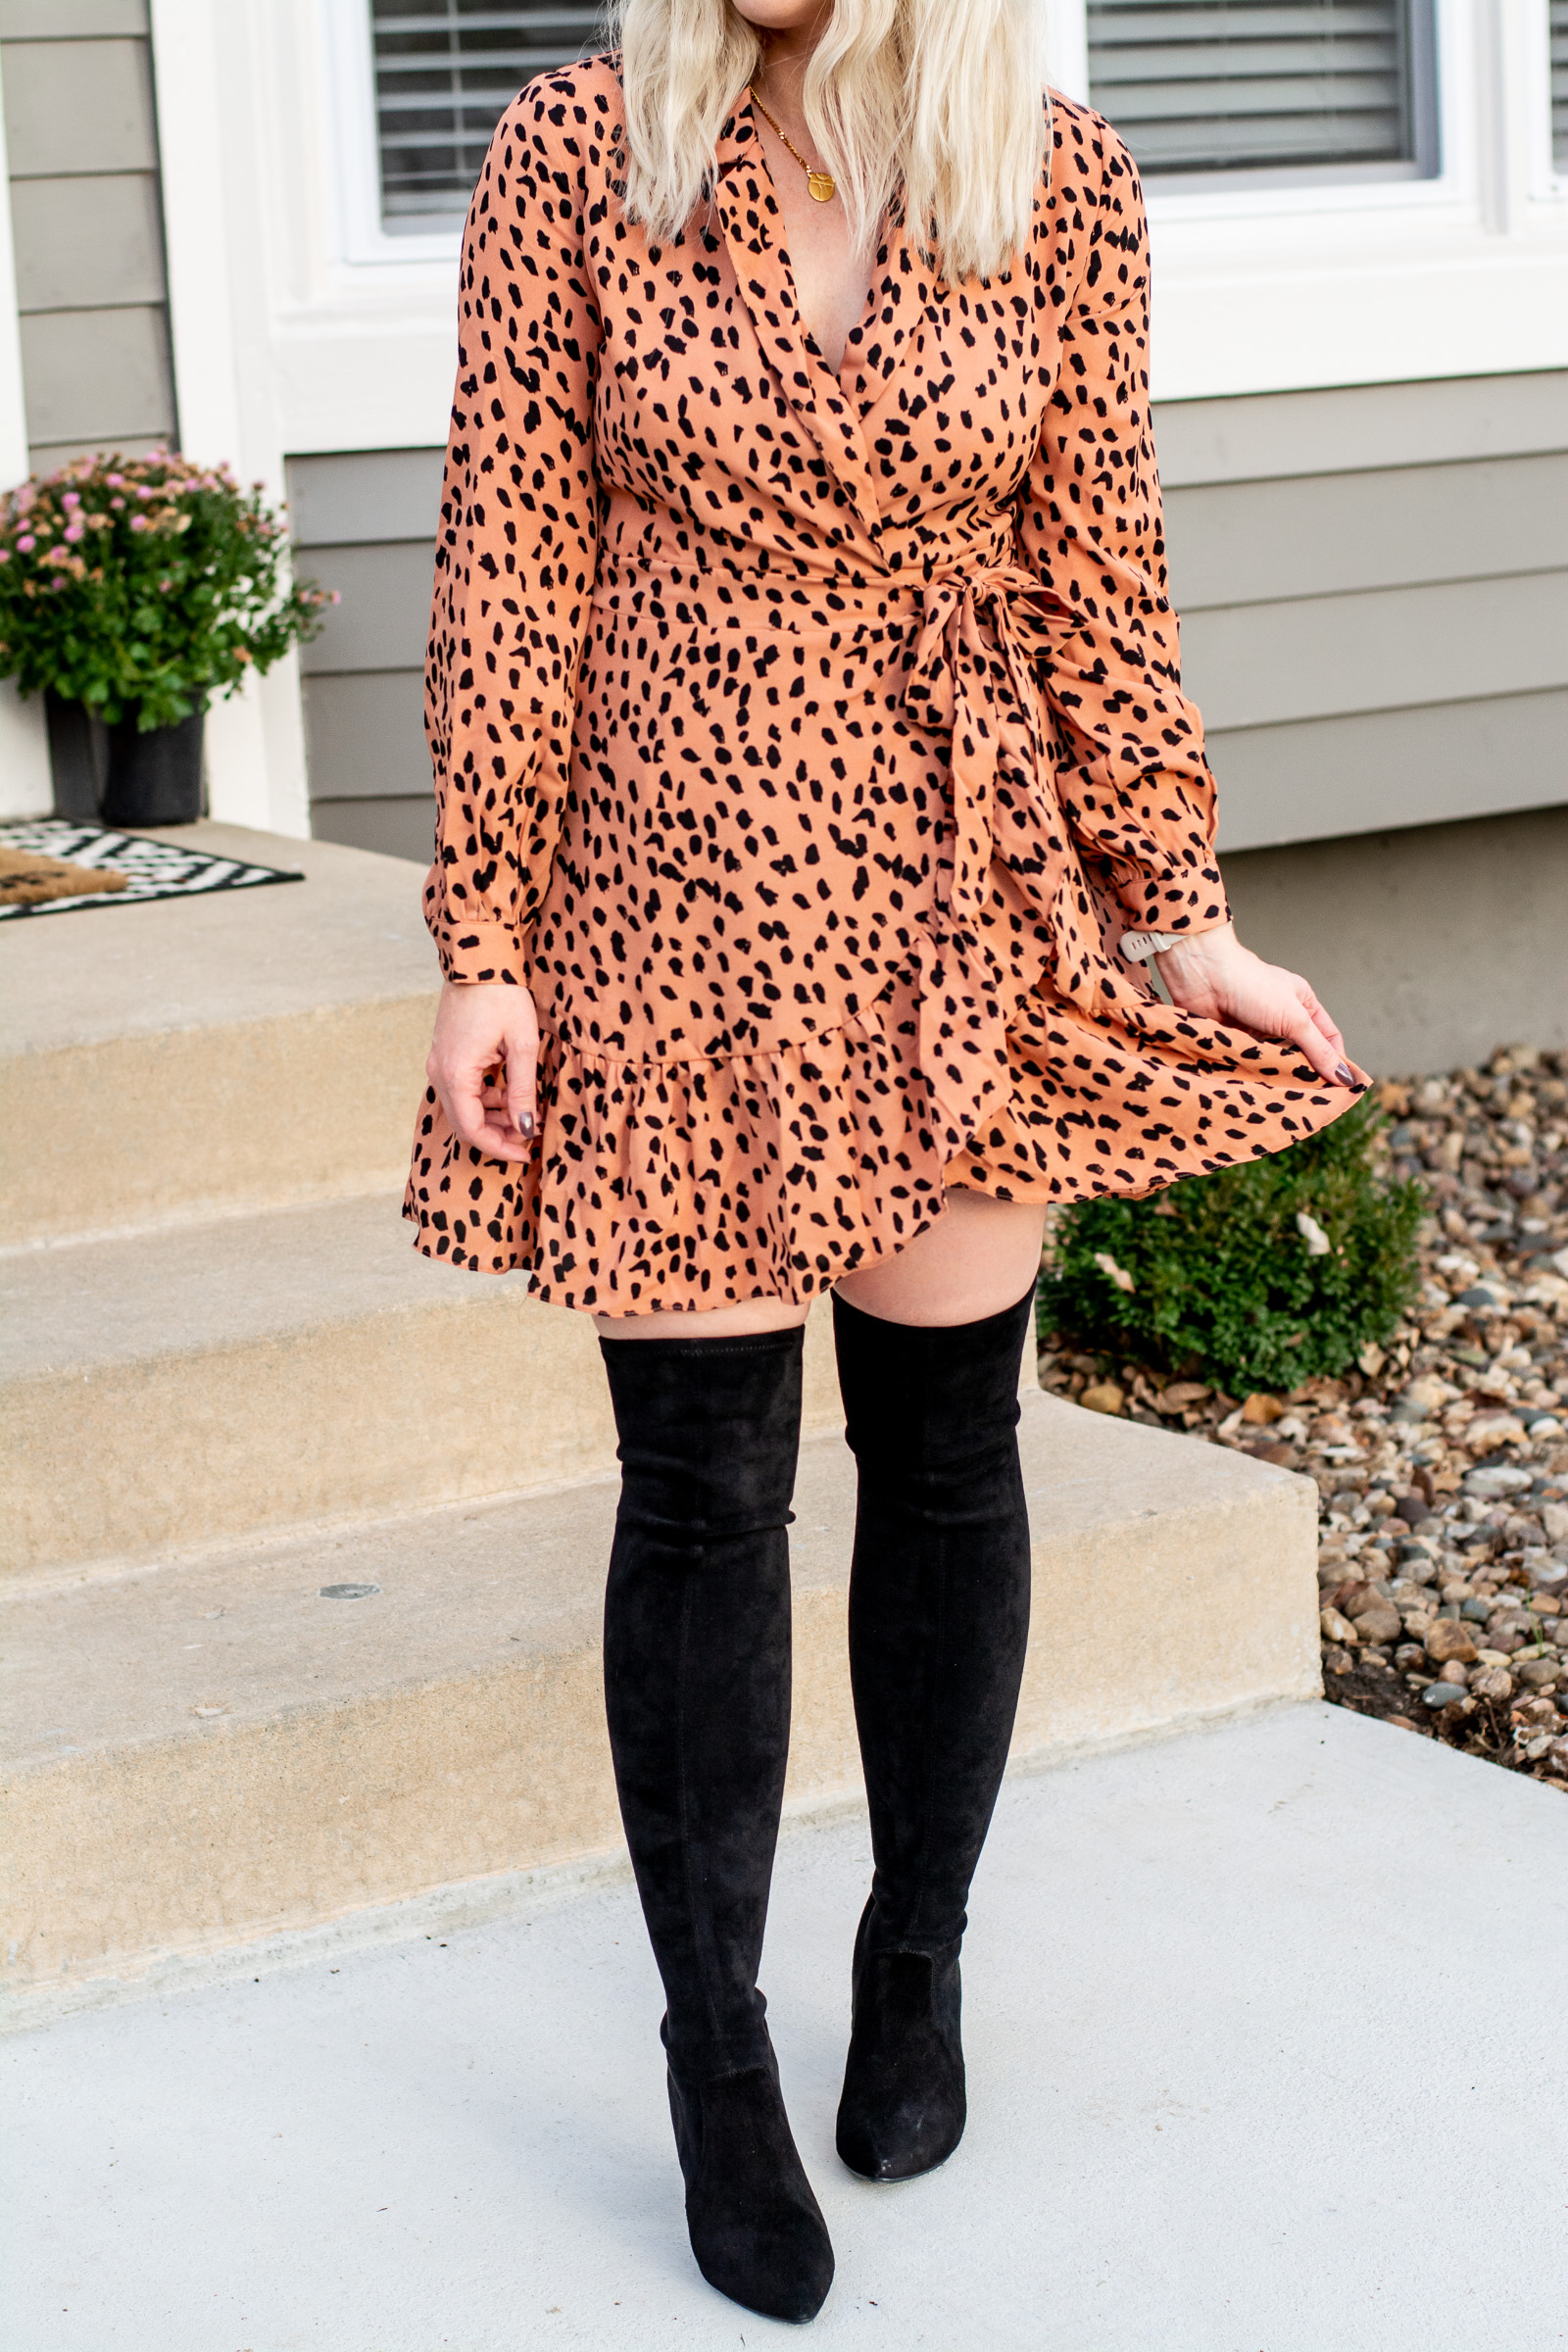 Holiday Outfit: Leopard Dress + Tall Boots. | LSR